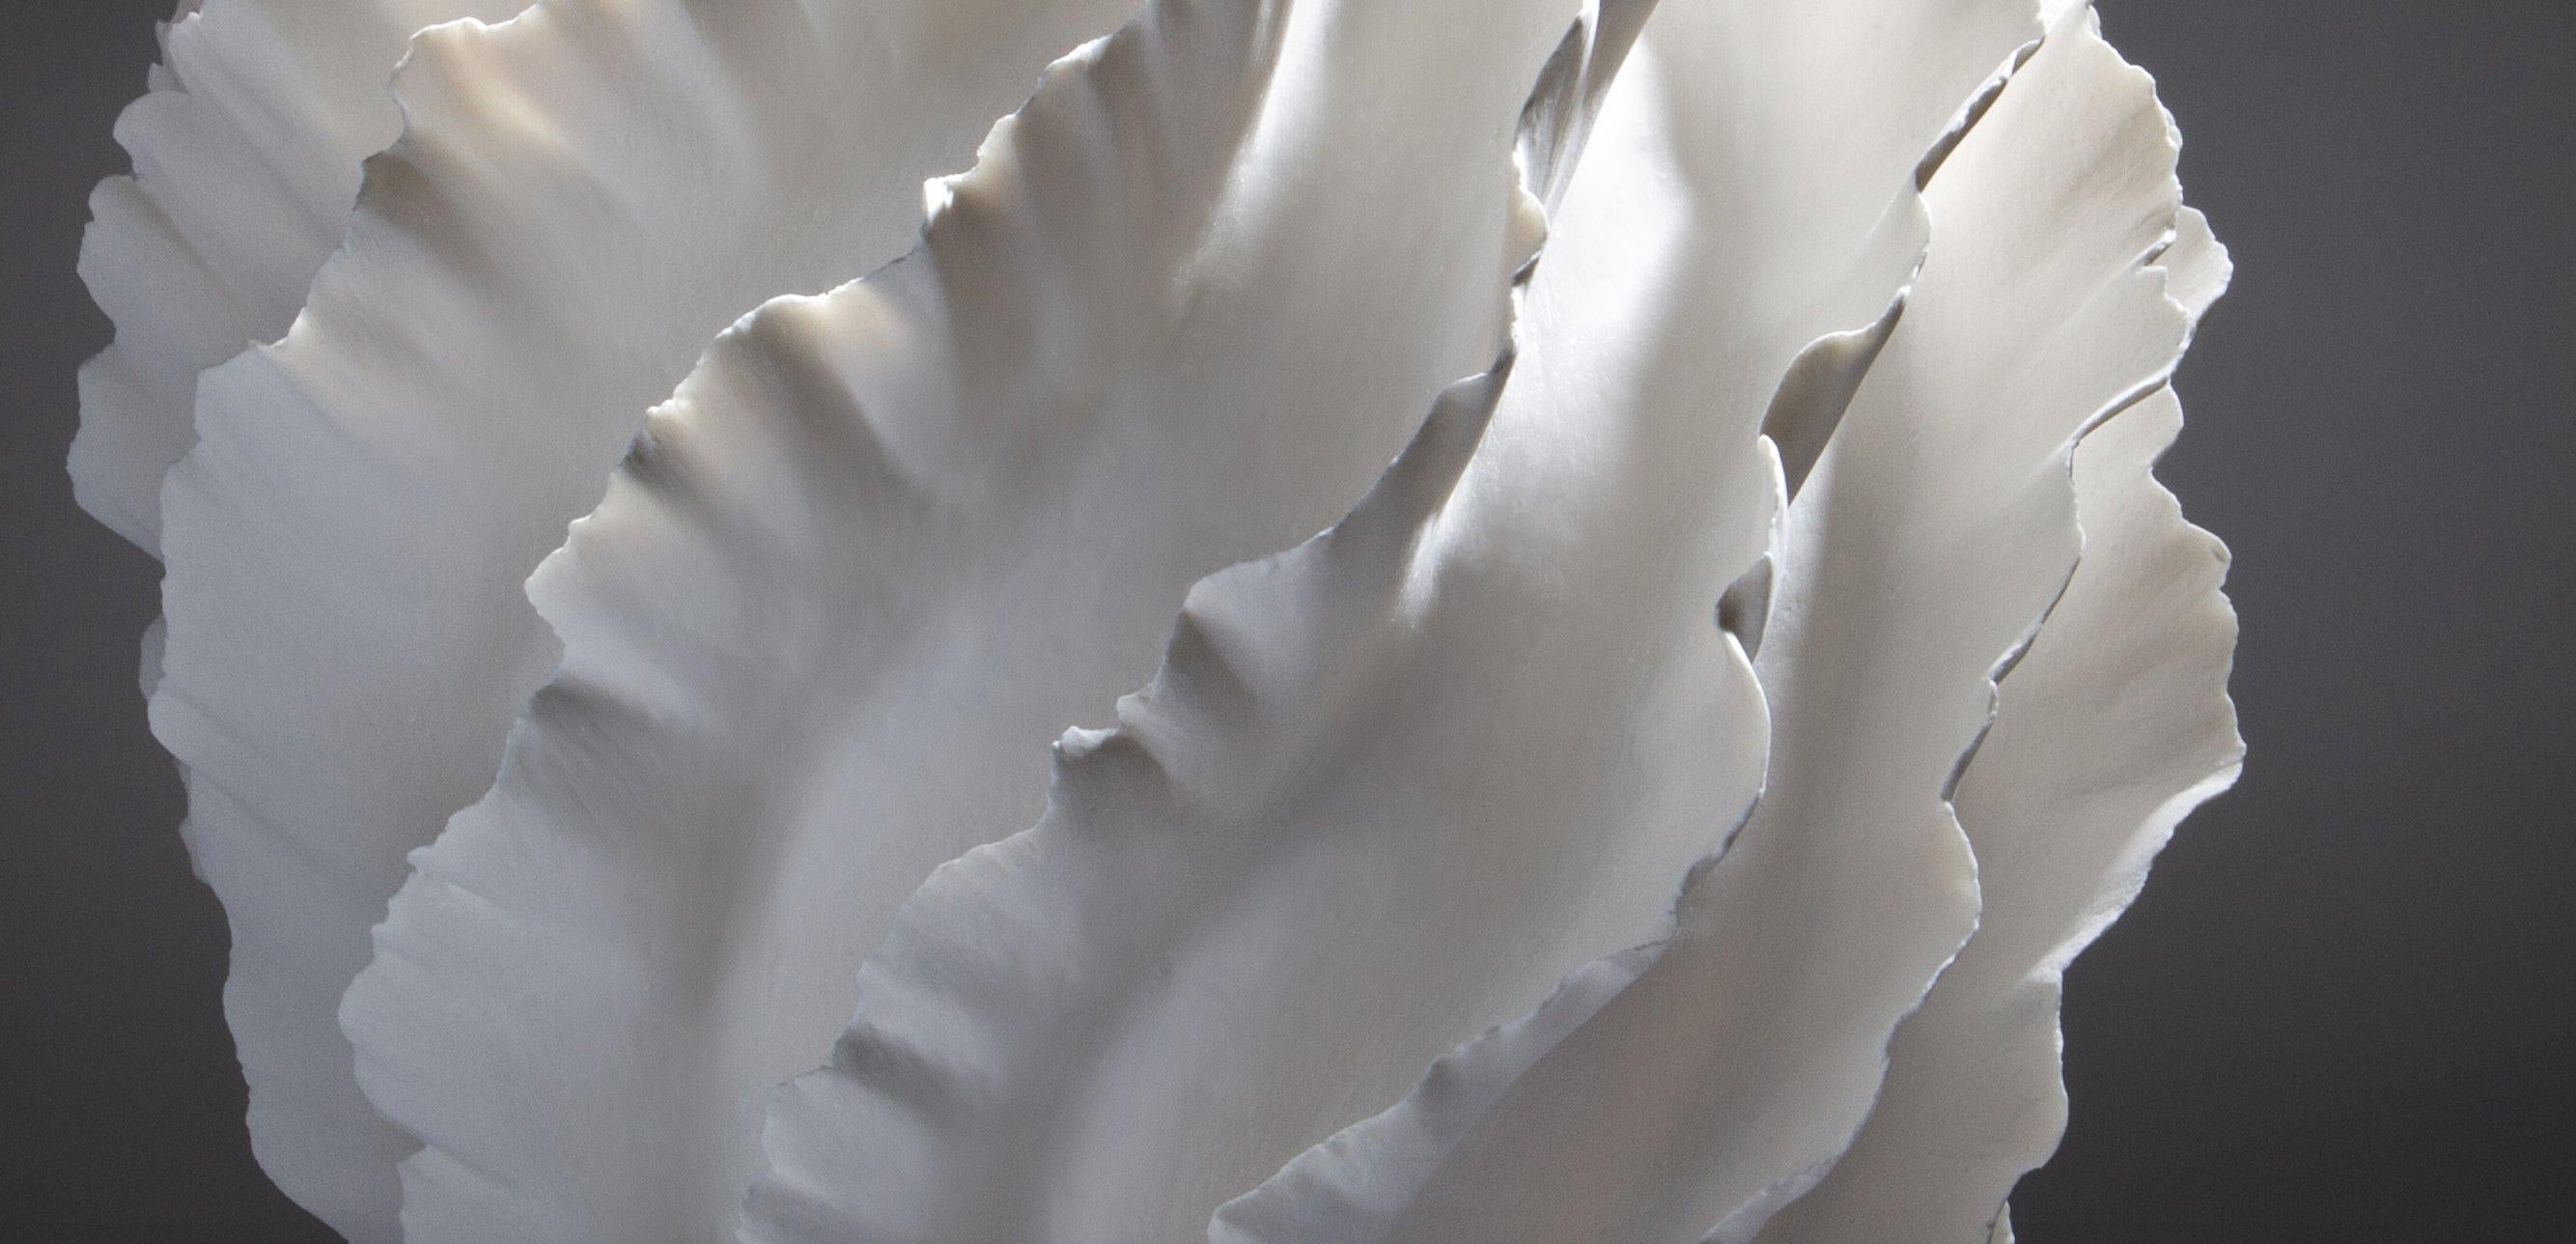 Contemporary Rippling White Ruffled Abstract Sculpture, Sandra Davolio For Sale